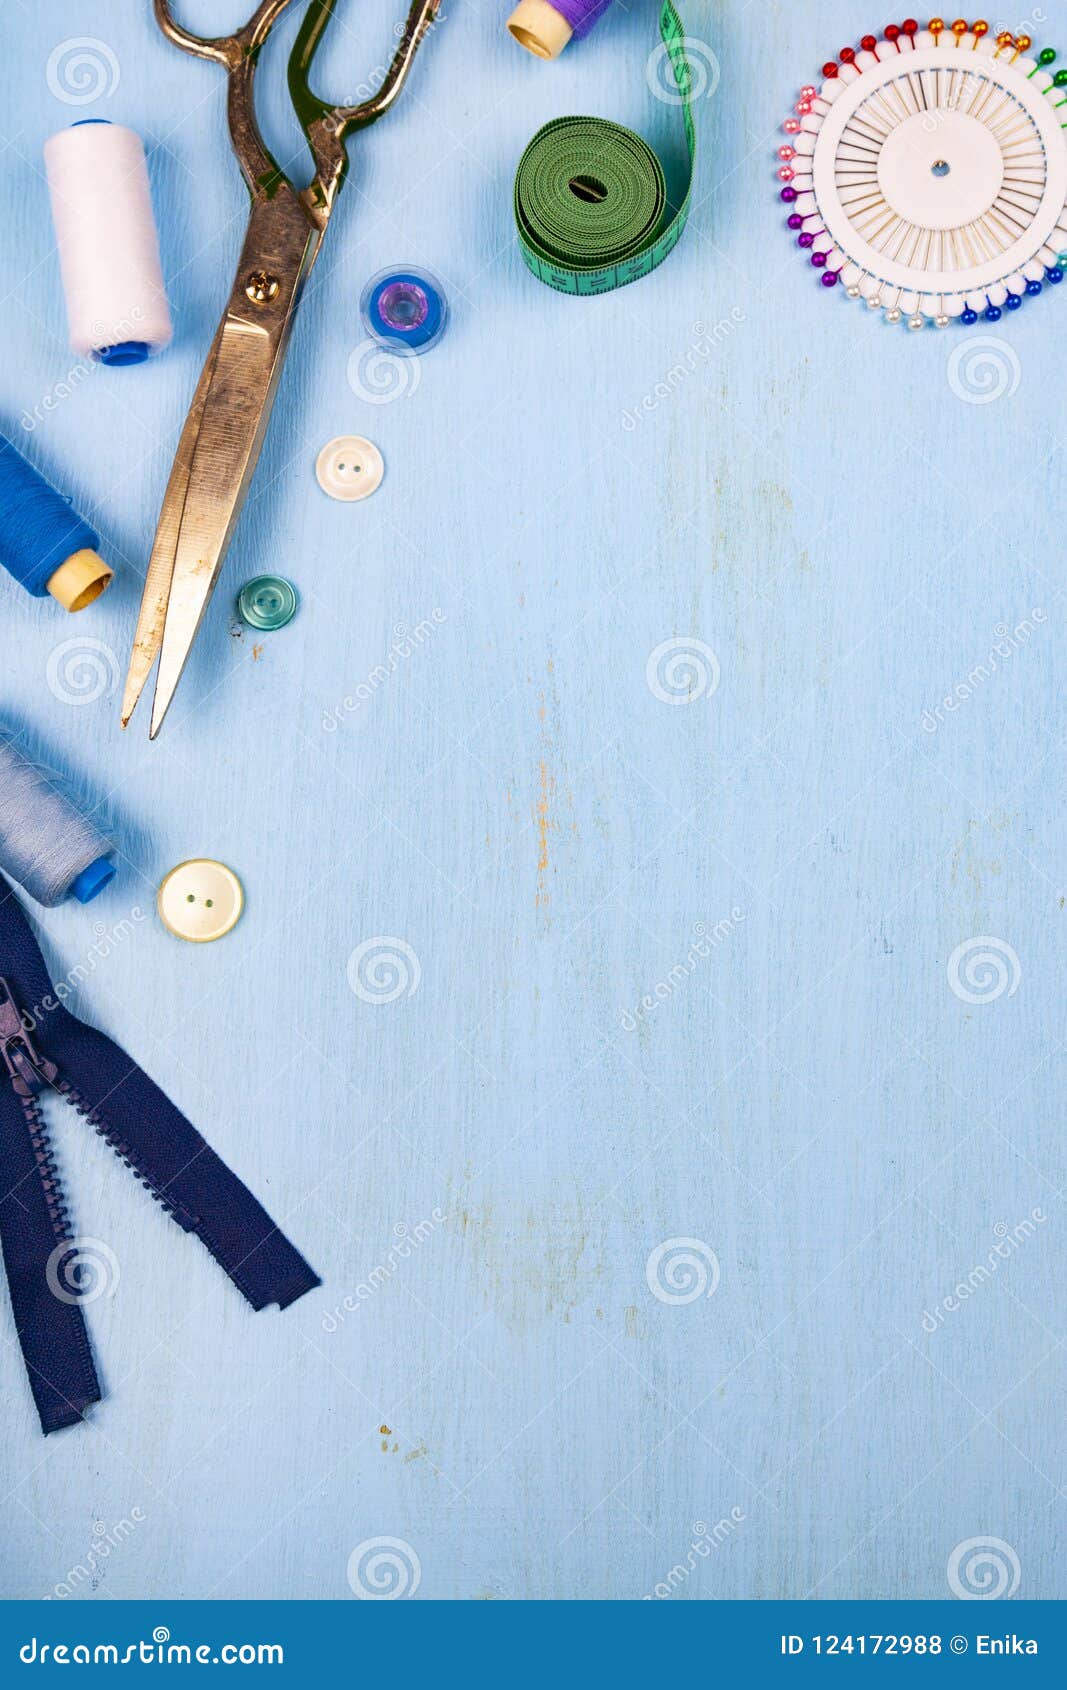 Sewing Accessories on a Blue Background Stock Photo - Image of cotton ...